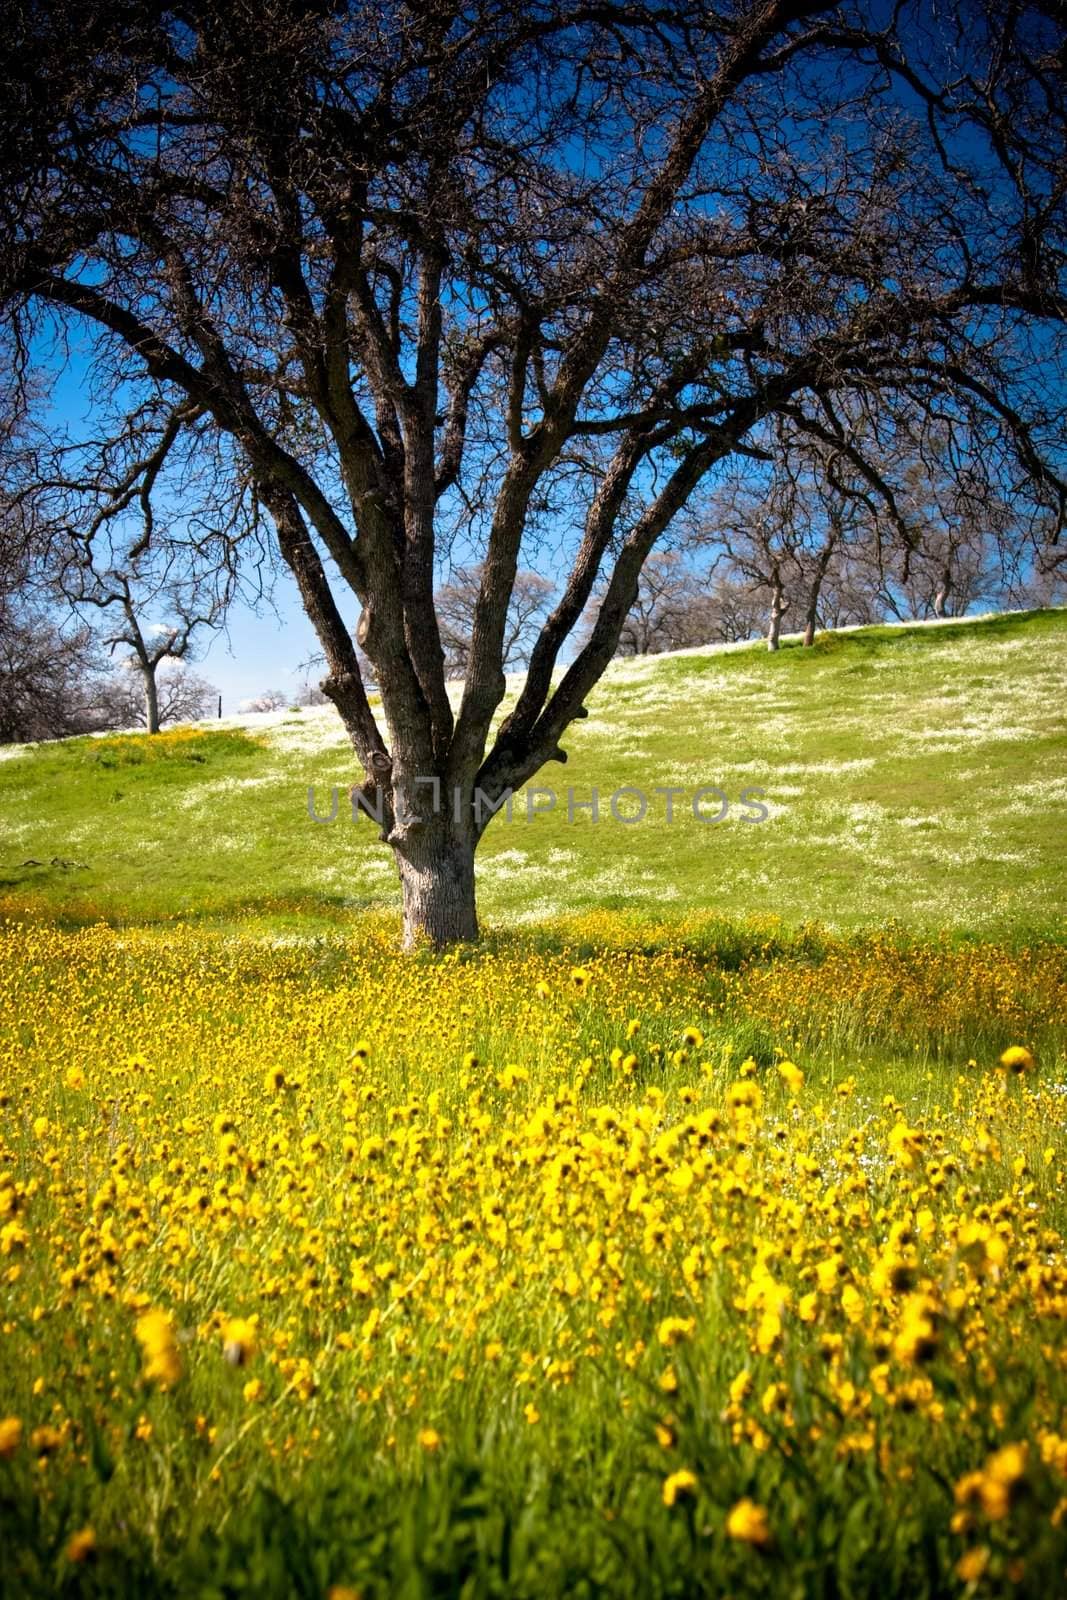 	
Leafless tree sitting in middle of field where yellow and white wild flowers grow, focus on tree